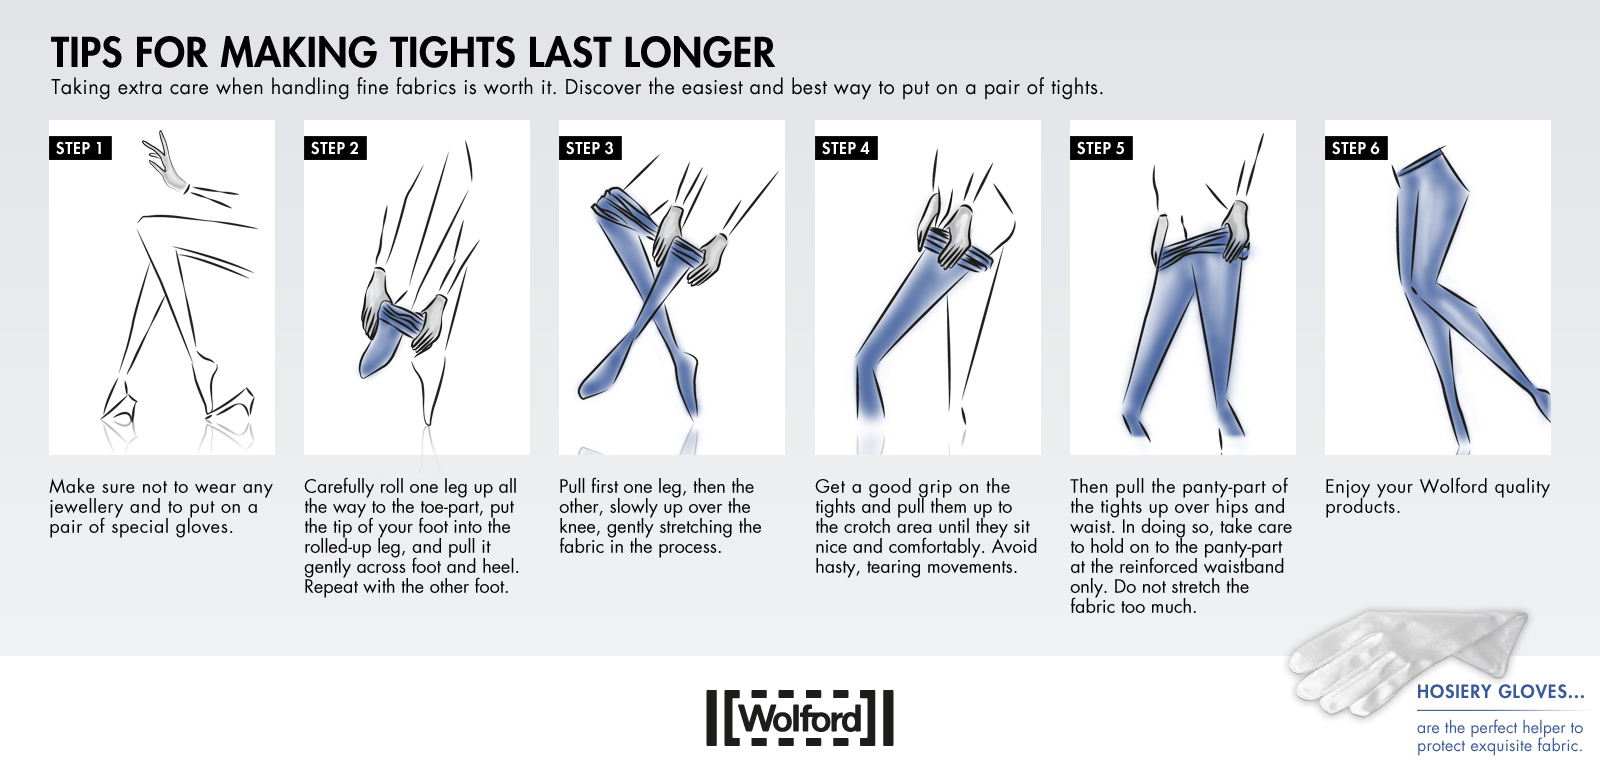 Wolford's 5 Steps For Making Tights Last Longer | UK Tights